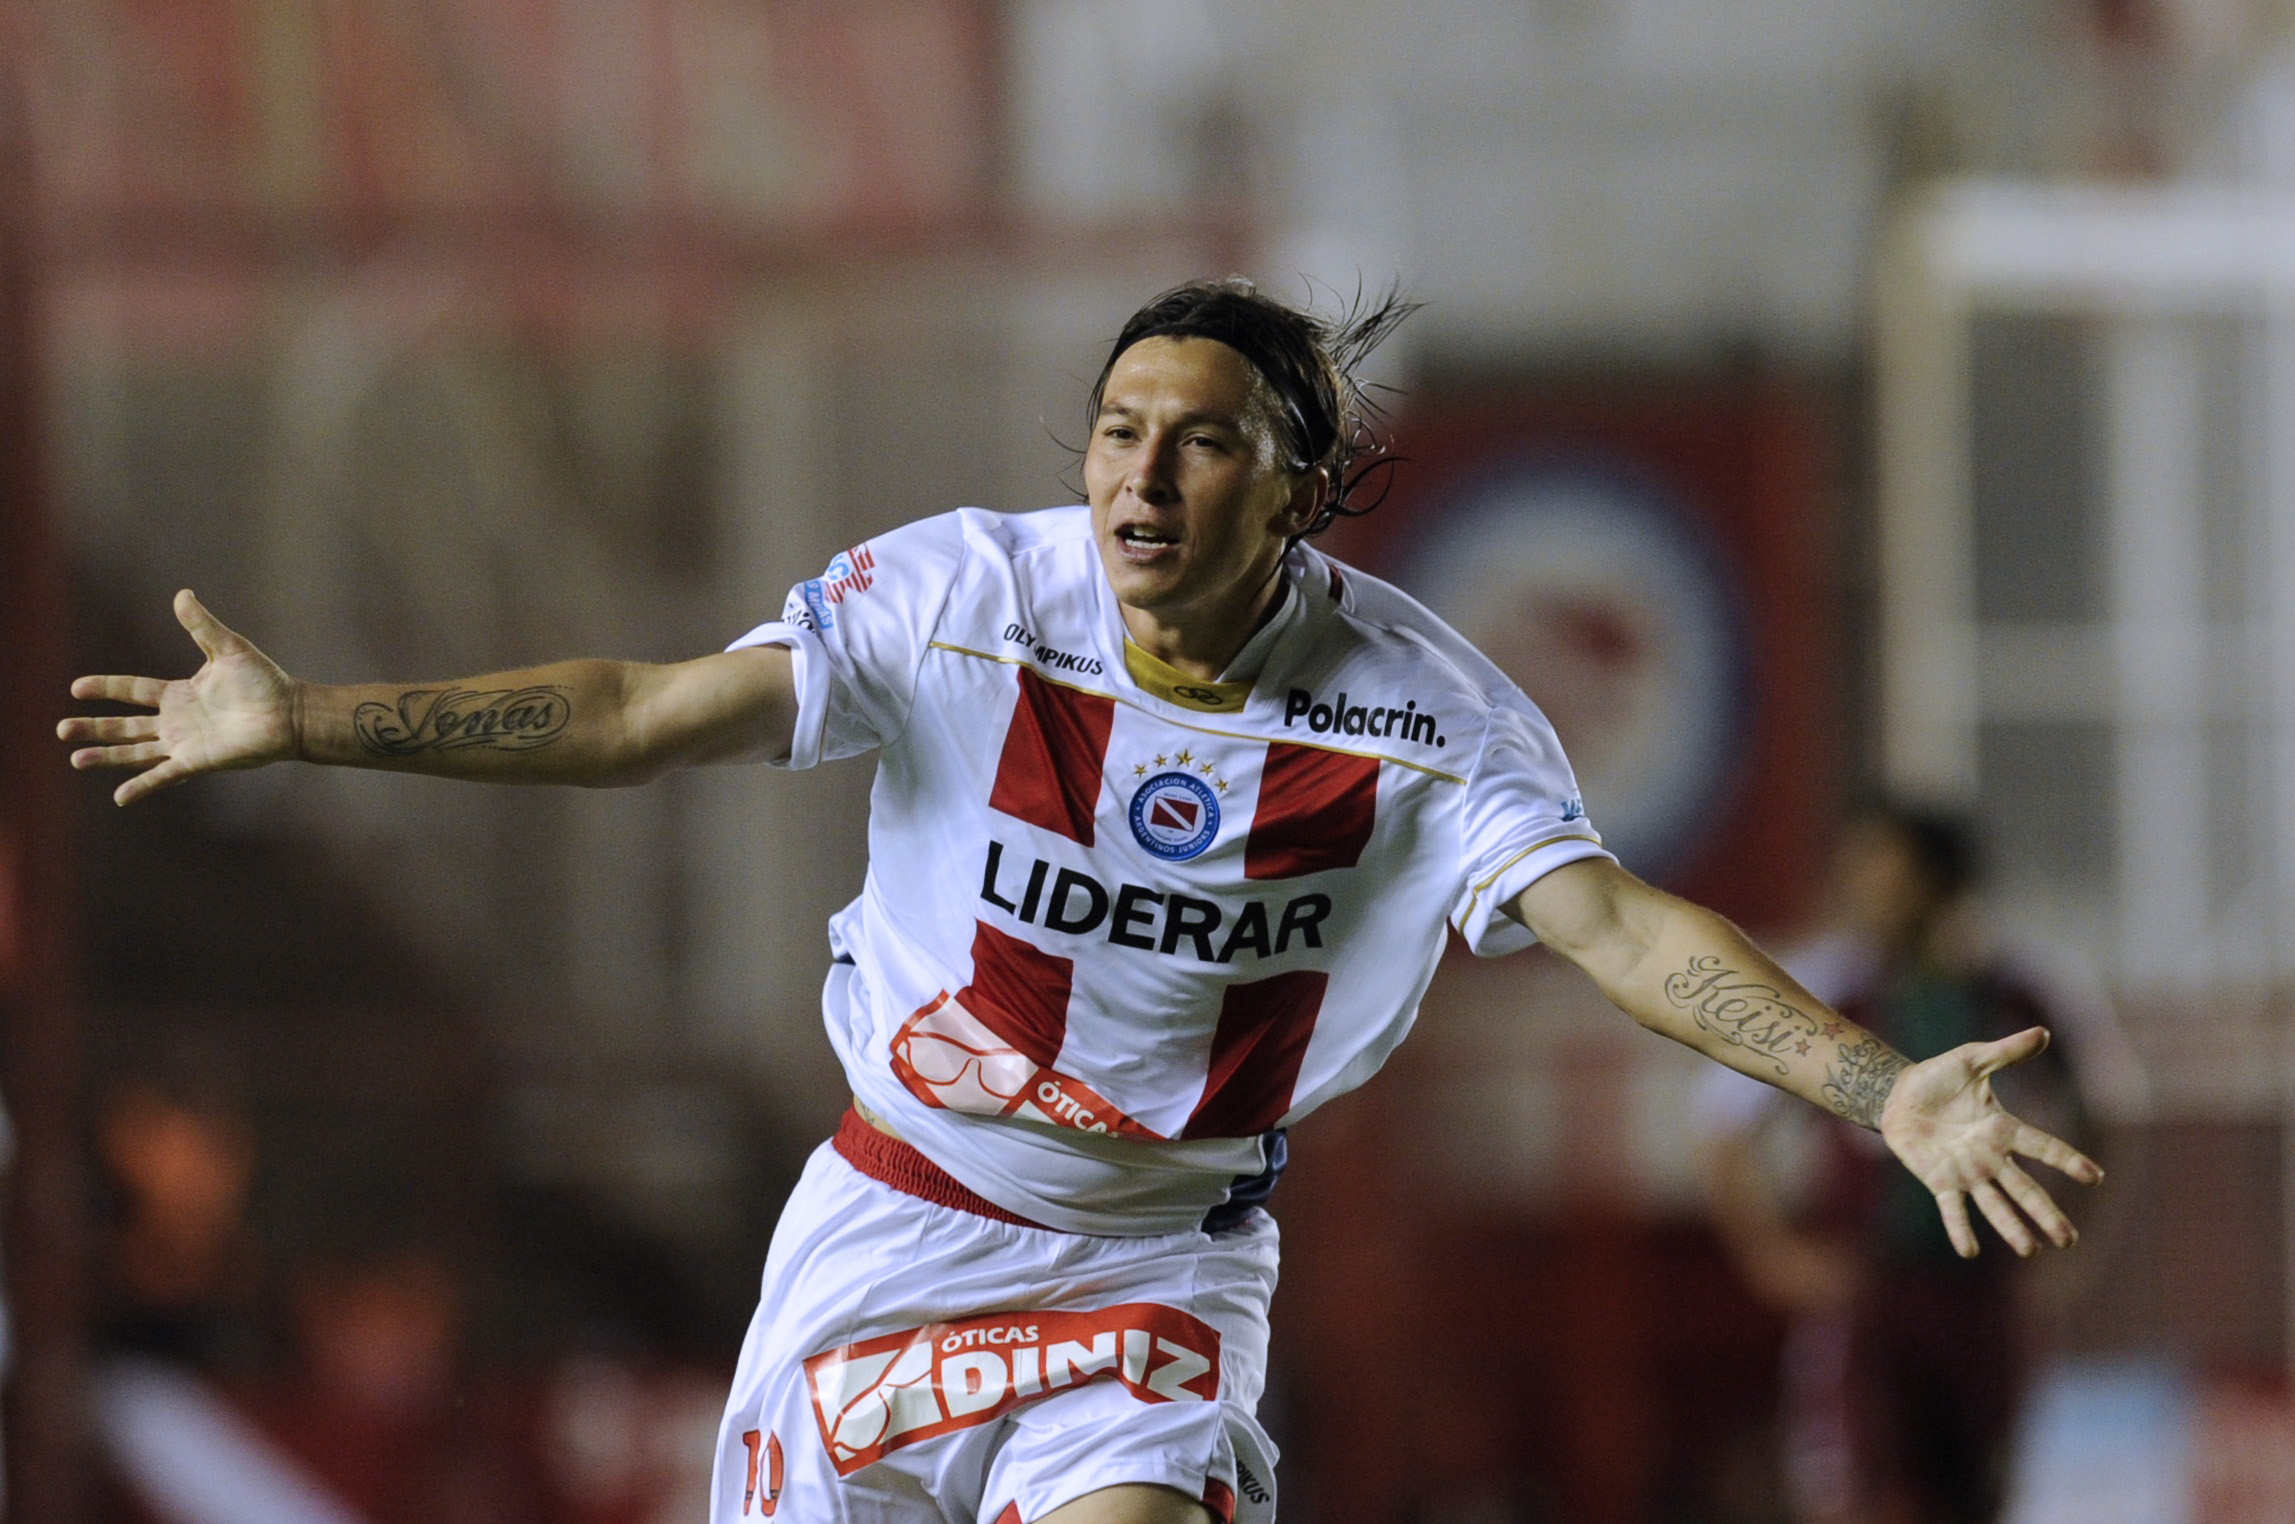 Argentina's Argentinos Juniors midfielder Gustavo Oberman celebrates after scoring the team's second goal against Brazil's Fluminense during their Copa Libertadores 2011 group 3 football match at Diego Maradona stadium in Buenos Aires, Argentina, on April 20, 2011. AFP PHOTO / Juan Mabromata (Photo credit should read JUAN MABROMATA/AFP/Getty Images)